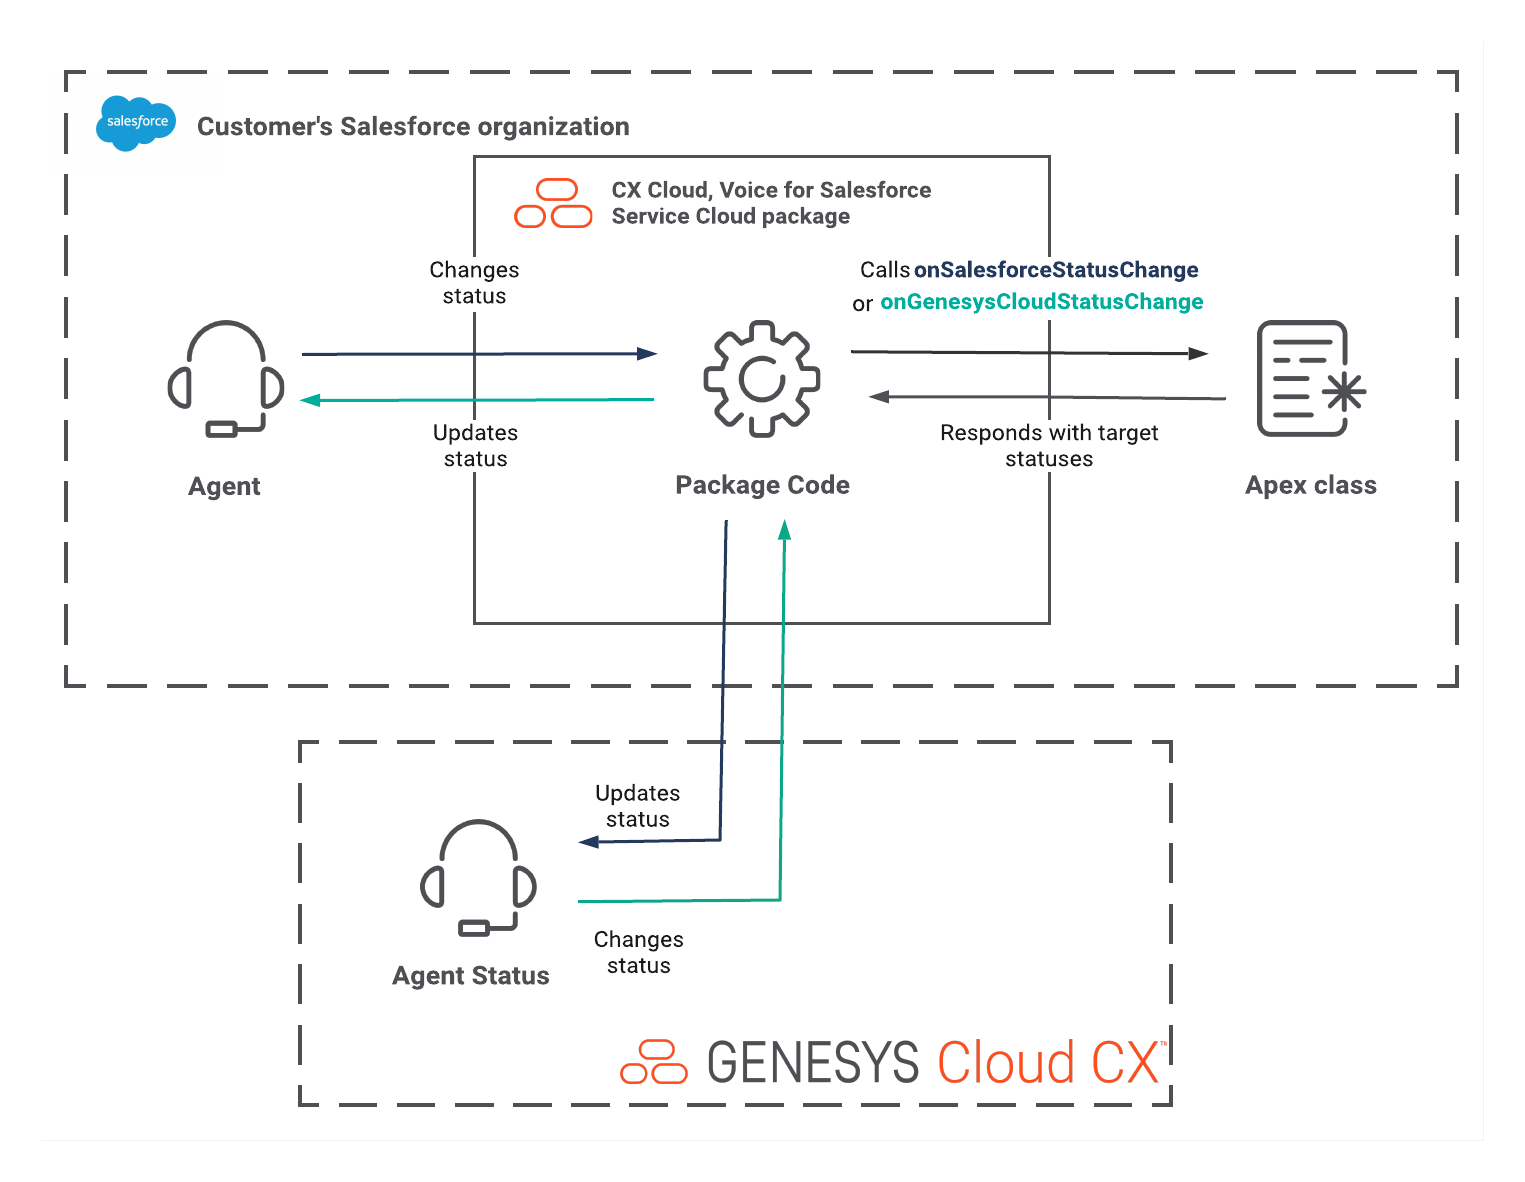 Workflow for enhanced status sync with the CX Cloud, Voice for Salesforce Service Cloud package